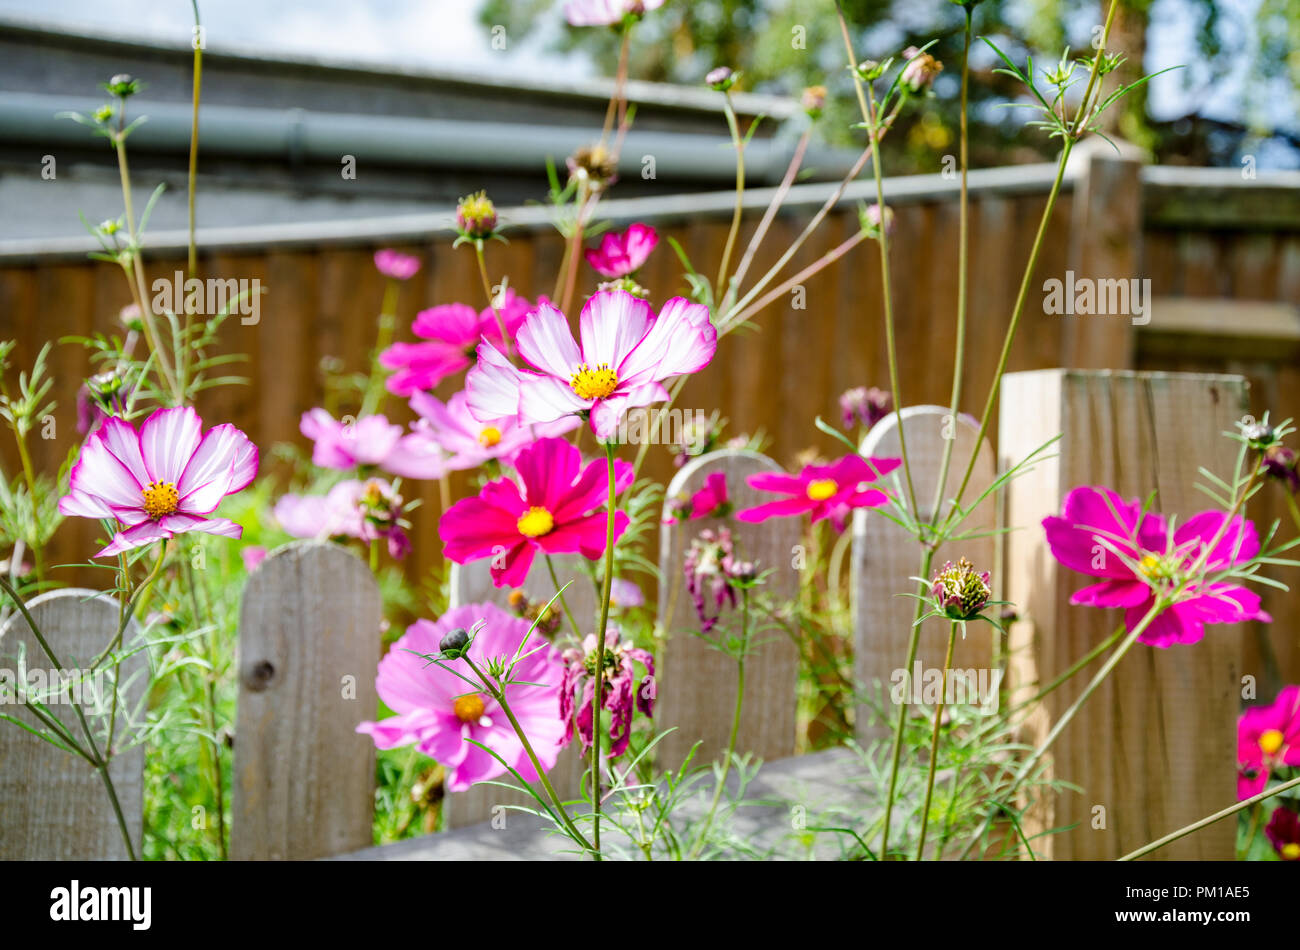 Cosmos Bipimmatus, varieties 'Candy Stripe' and 'Sensation Mixed' growing in a residential back garden. Stock Photo